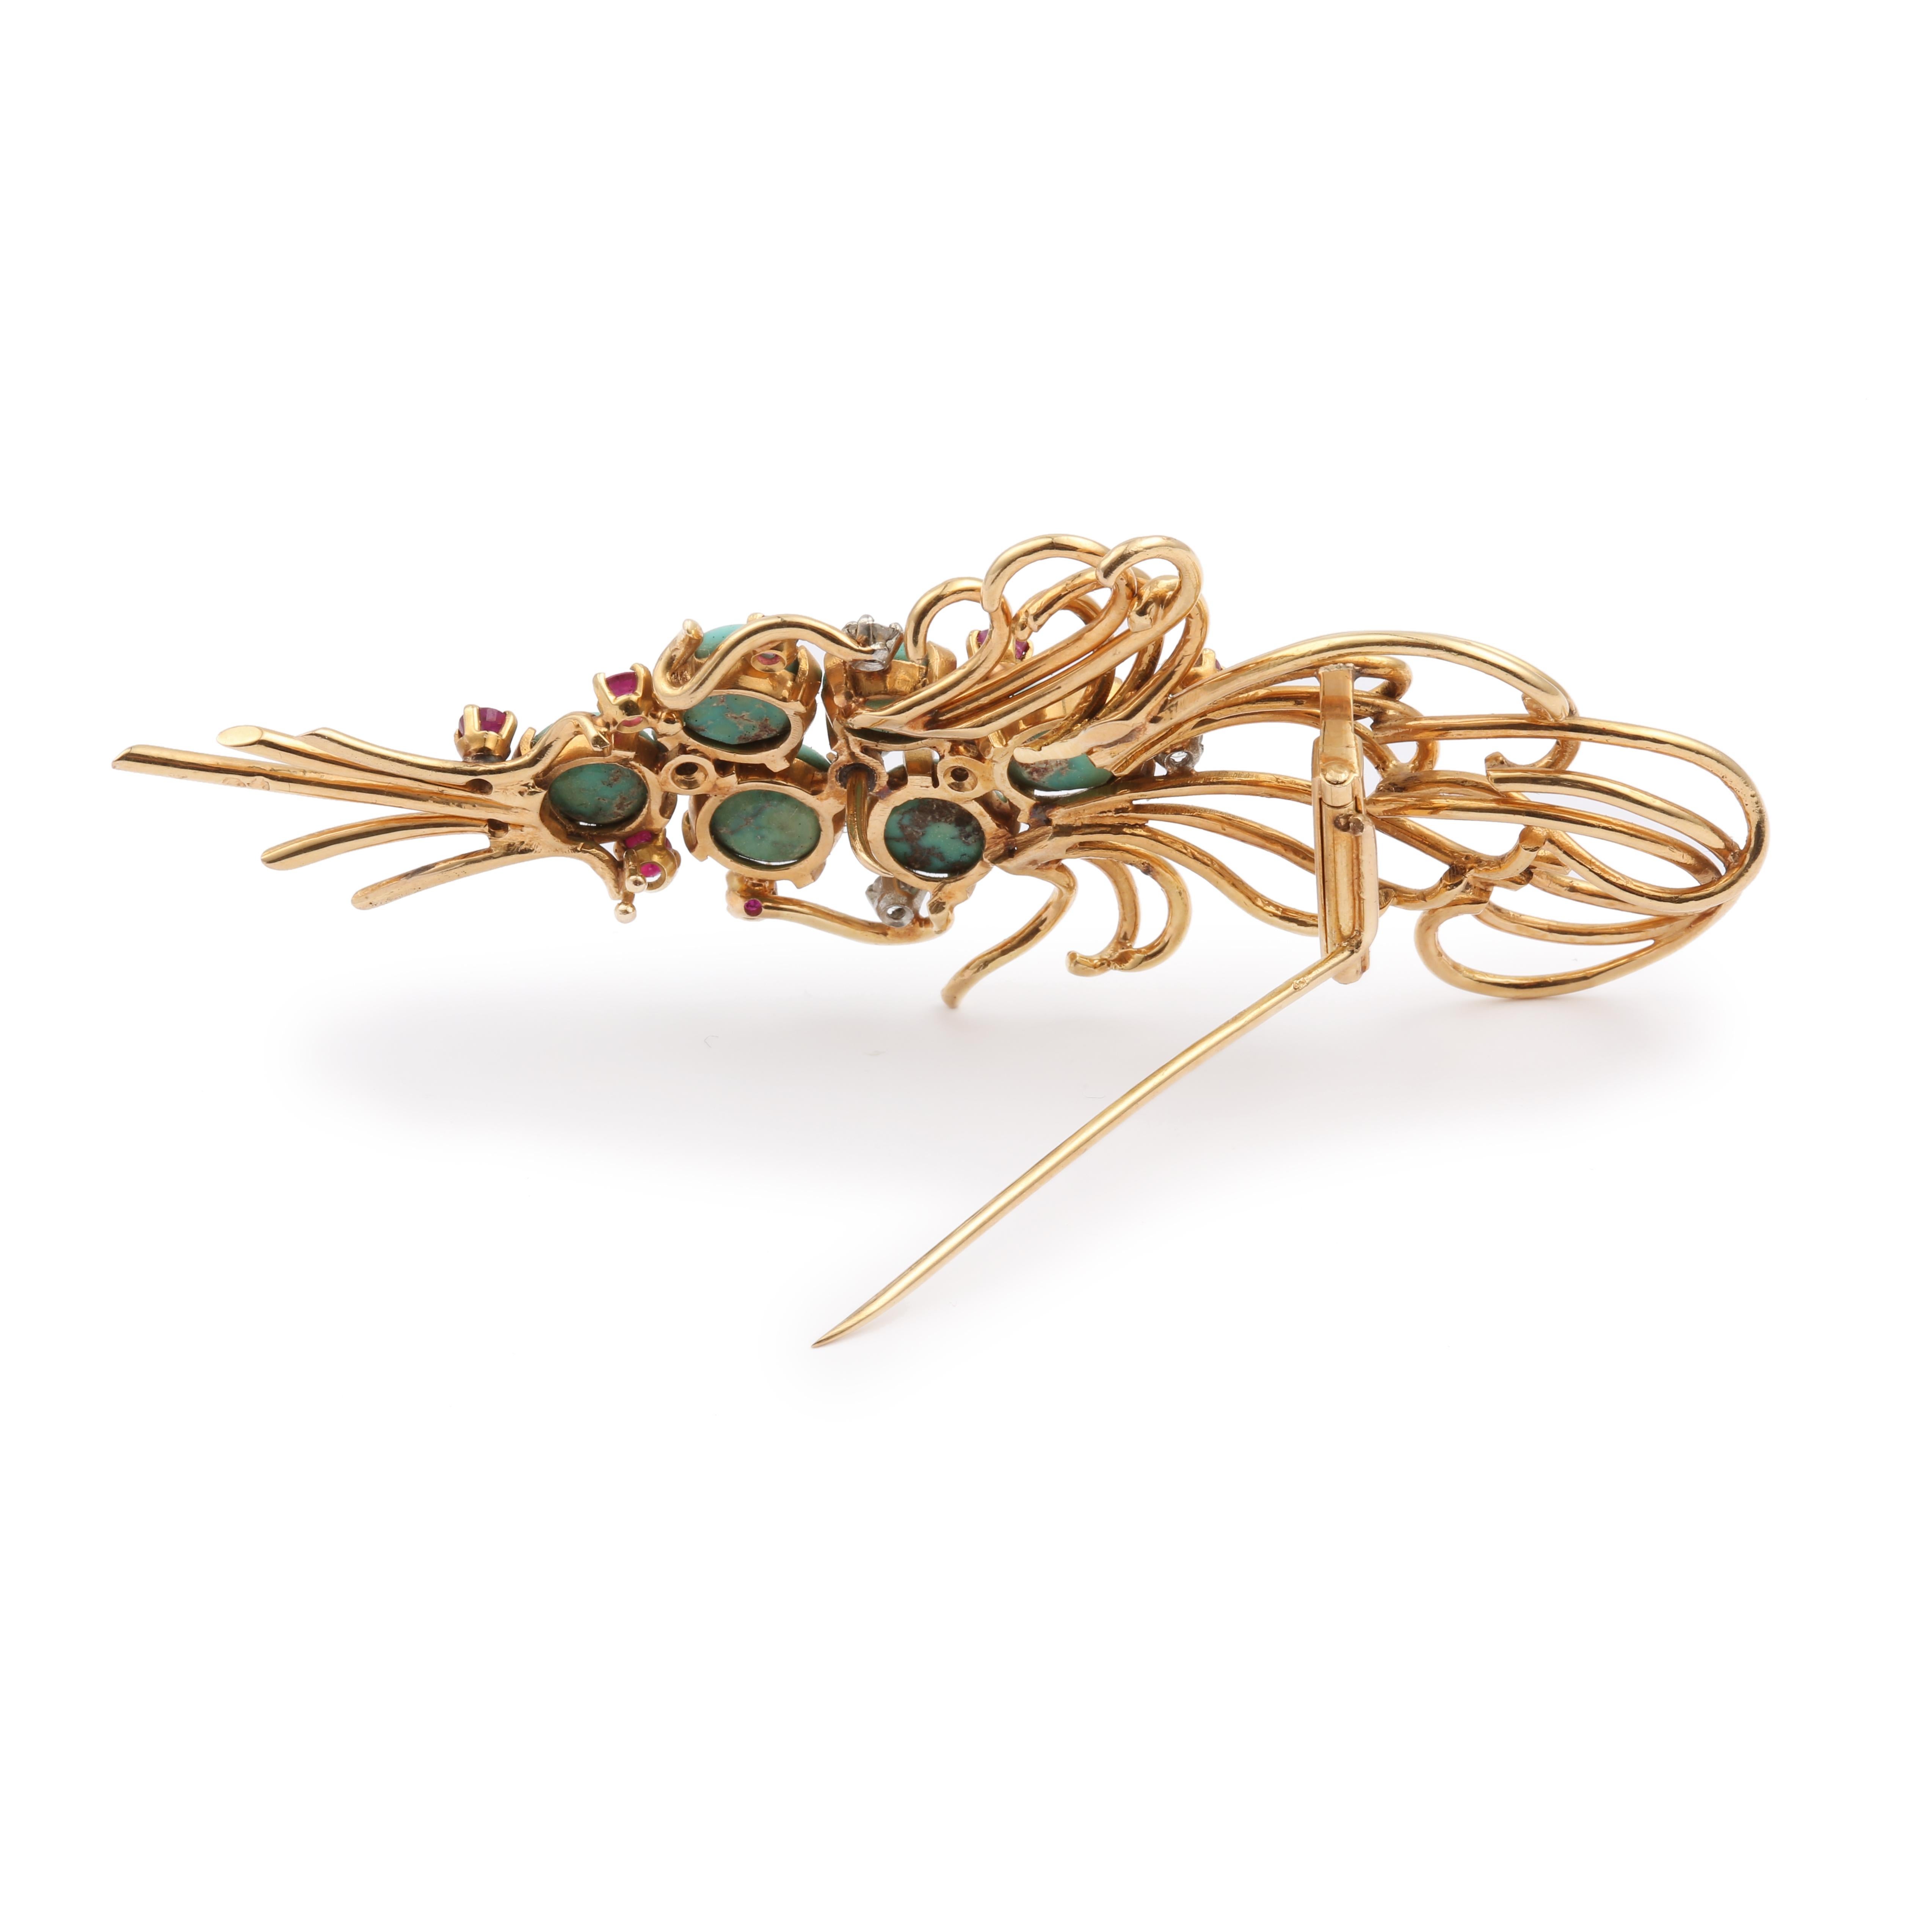 Yellow gold and platinum ribbon brooch set with turquoise, rubies and brilliant-cut diamonds. 

Total estimated weight of turquoise : 9.20 carats

Total estimated weight of rubies : 0.70 carats

Total estimated weight of diamonds : 0.48